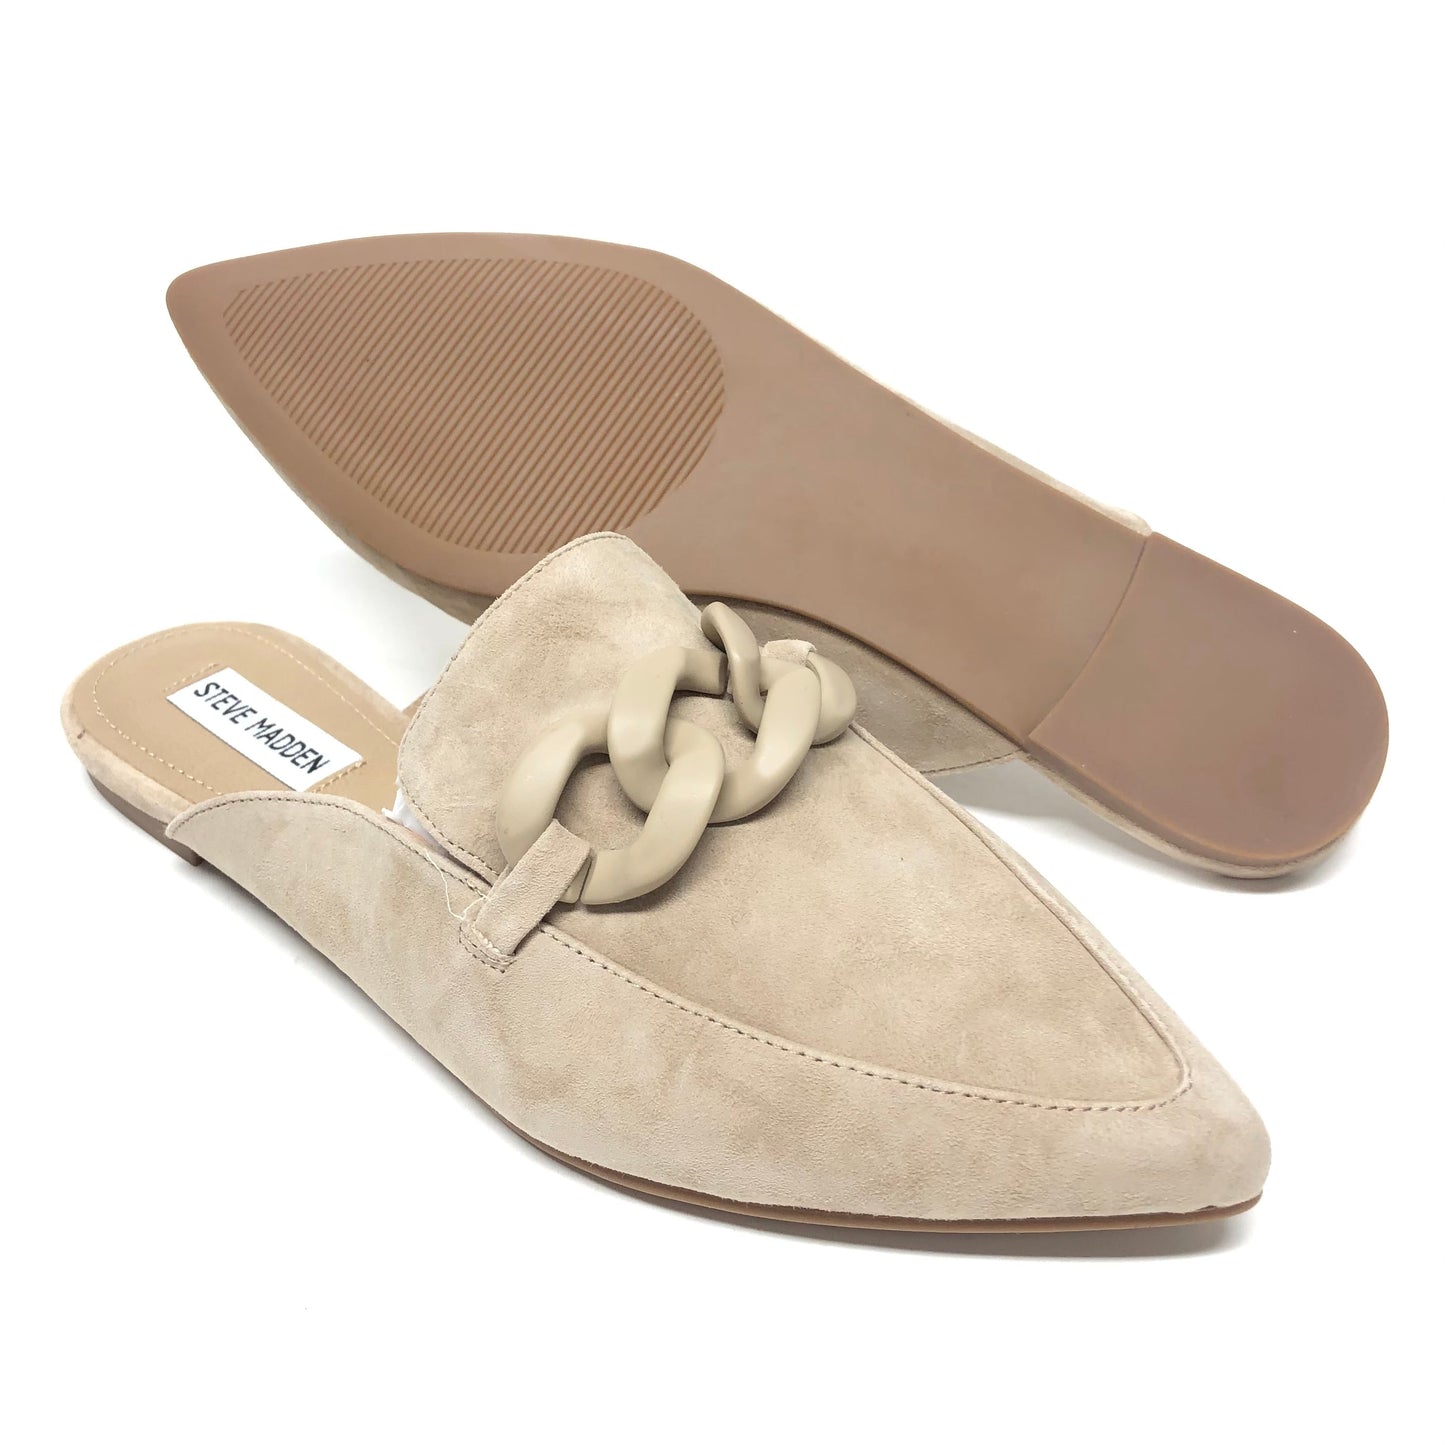 Taupe Shoes Flats Steve Madden, Size 10